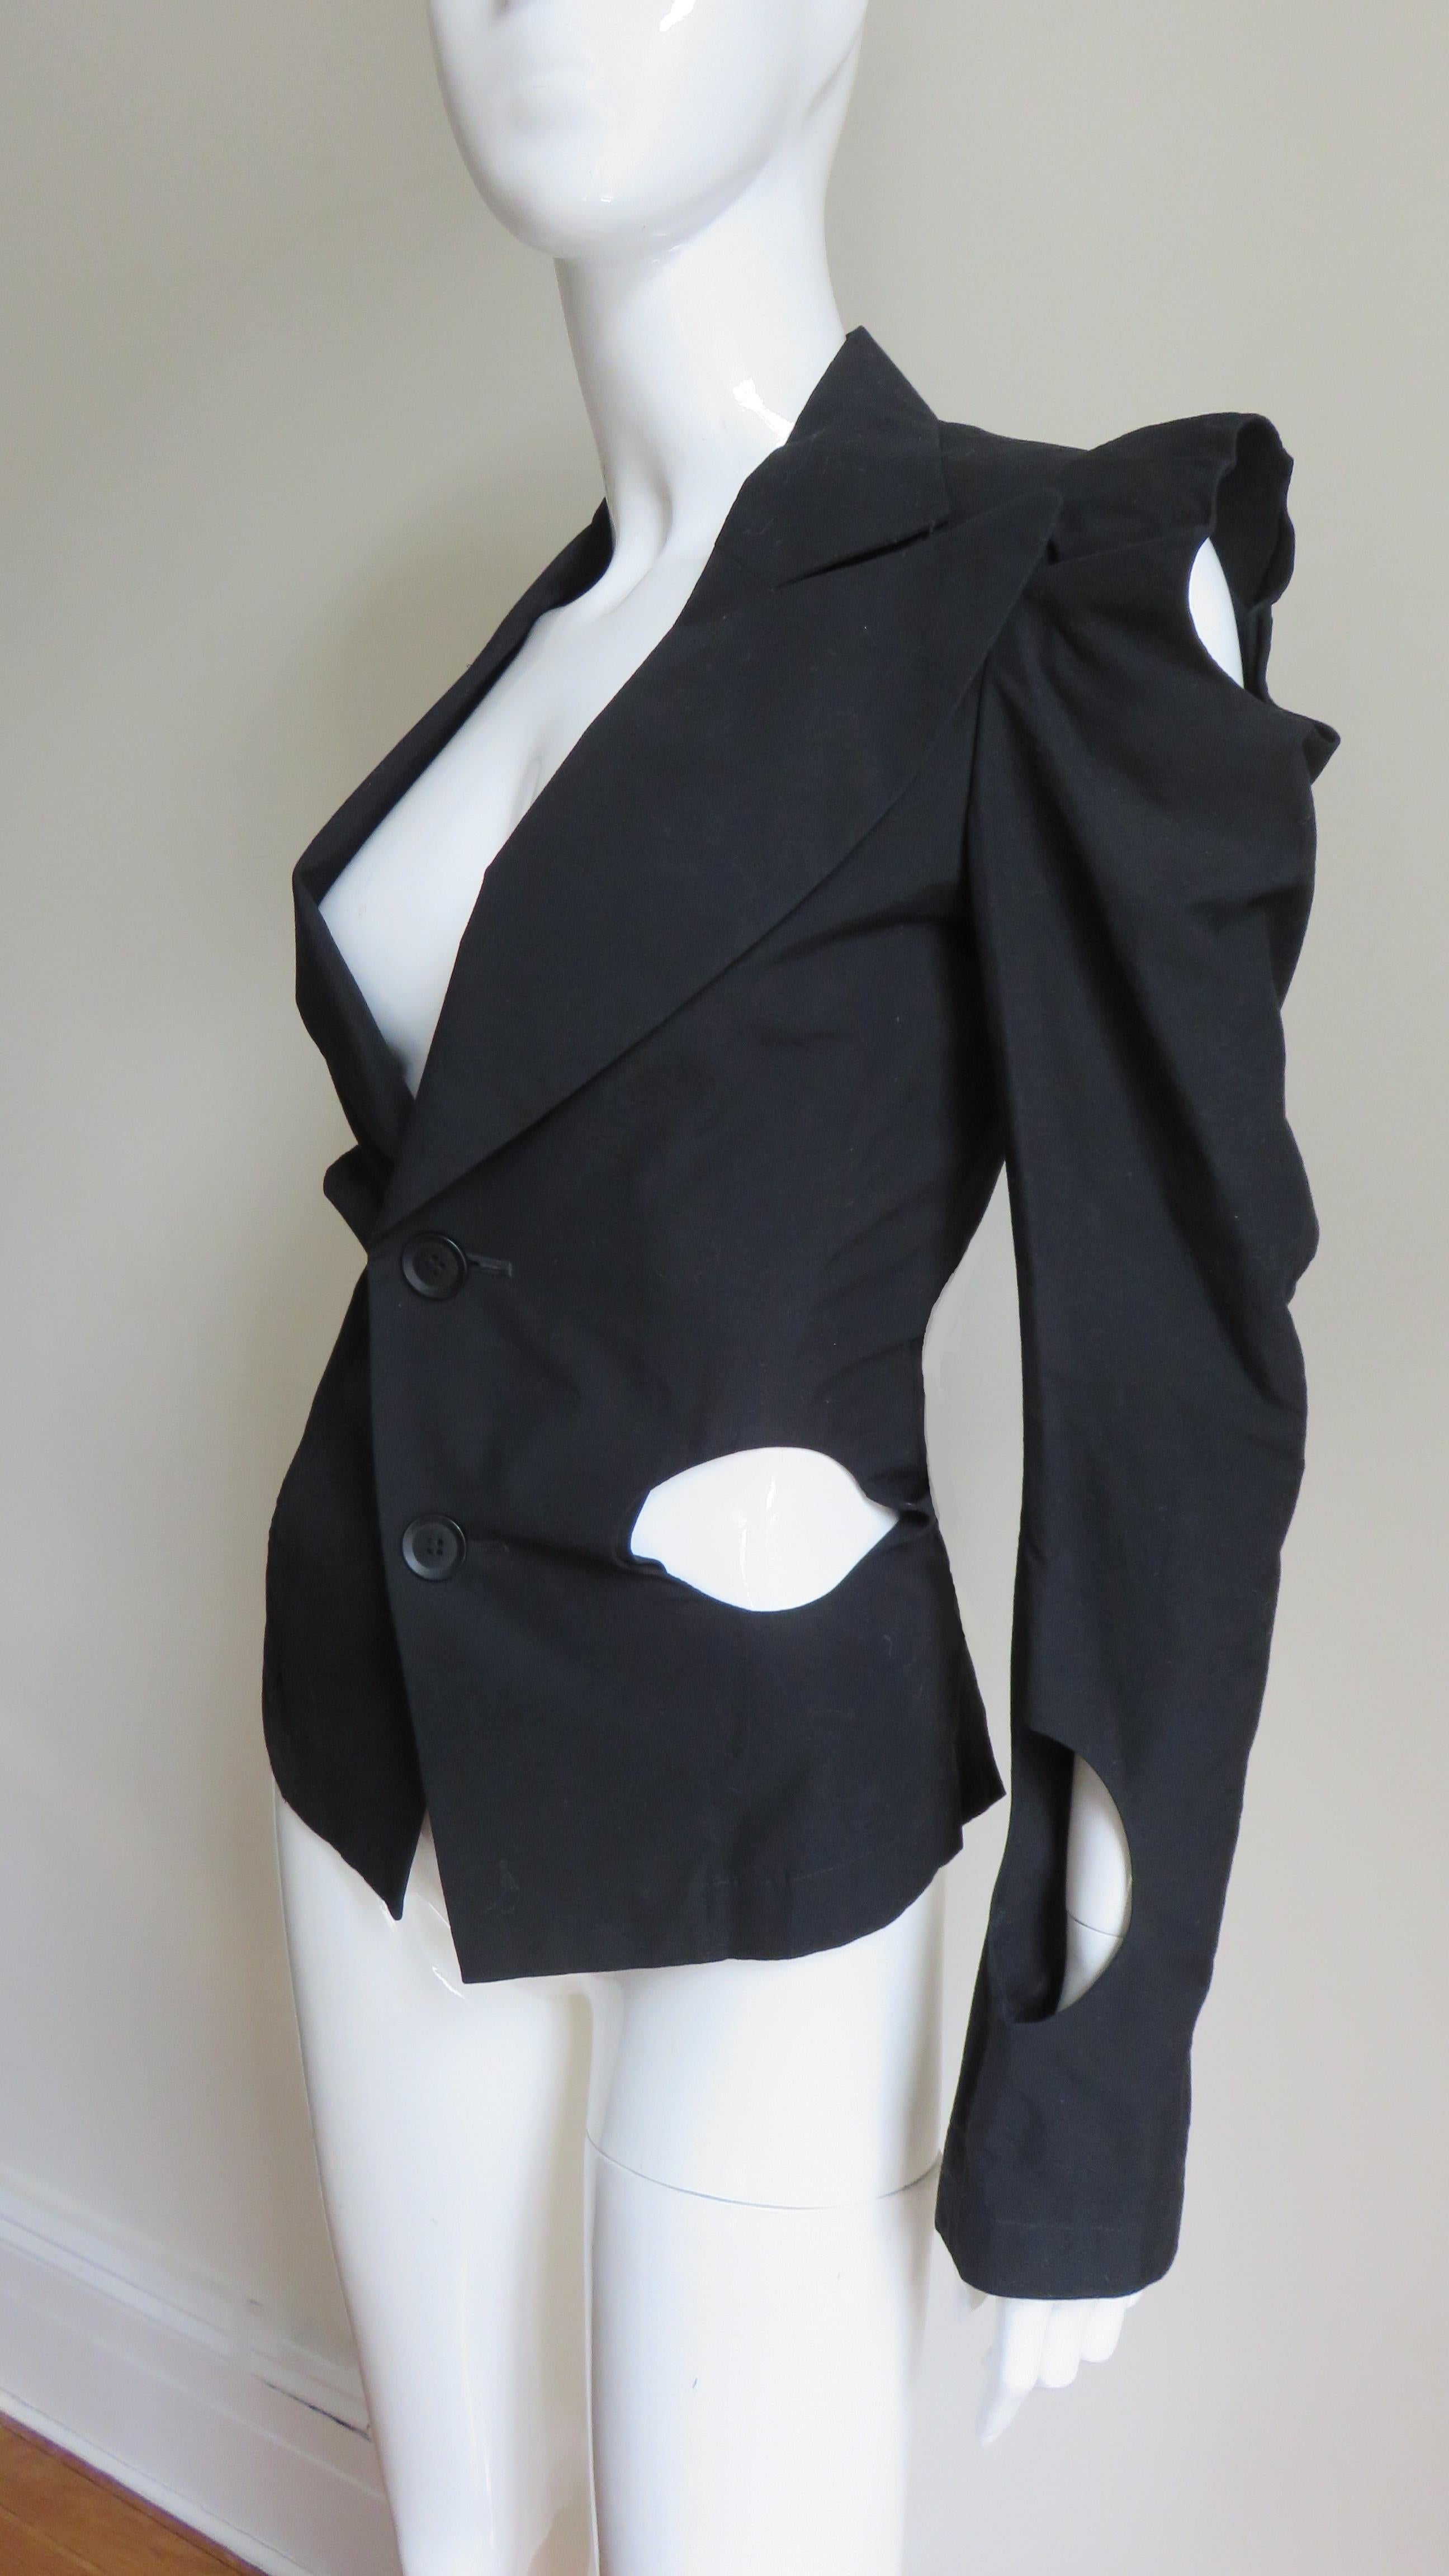 Yohji Yamamoto Jacket with Circle Cut outs In Excellent Condition For Sale In Water Mill, NY